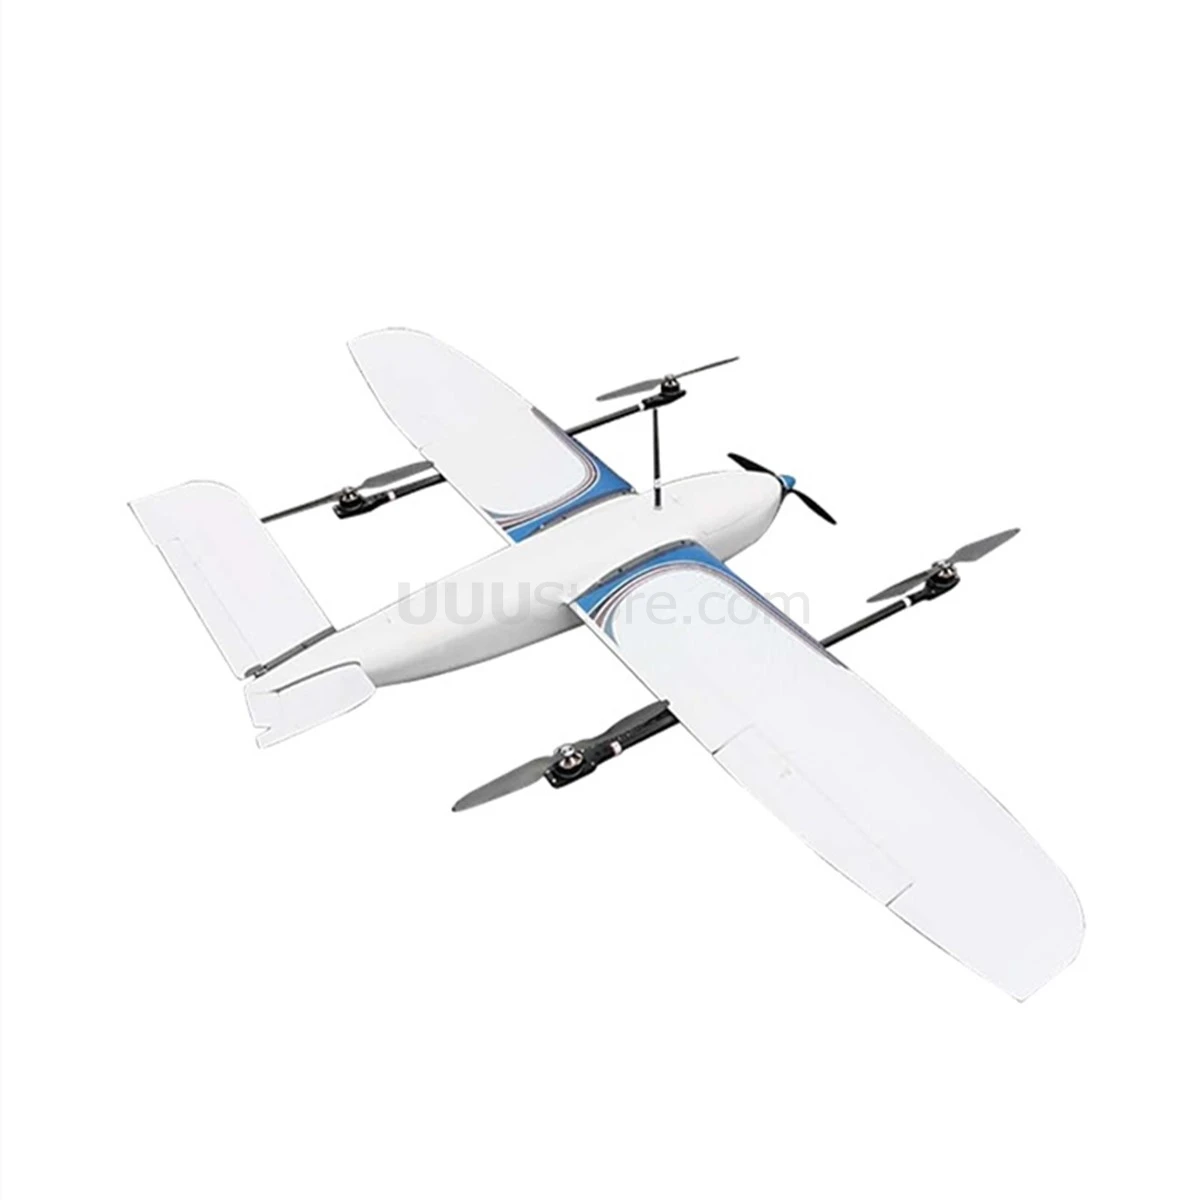 Flying Dragon 2160mm VTOL Vertical Takeoff And Landing 4+1 Engine EPO FPV Remote Control Airplane Aerial Survey Aircraft KIT 6